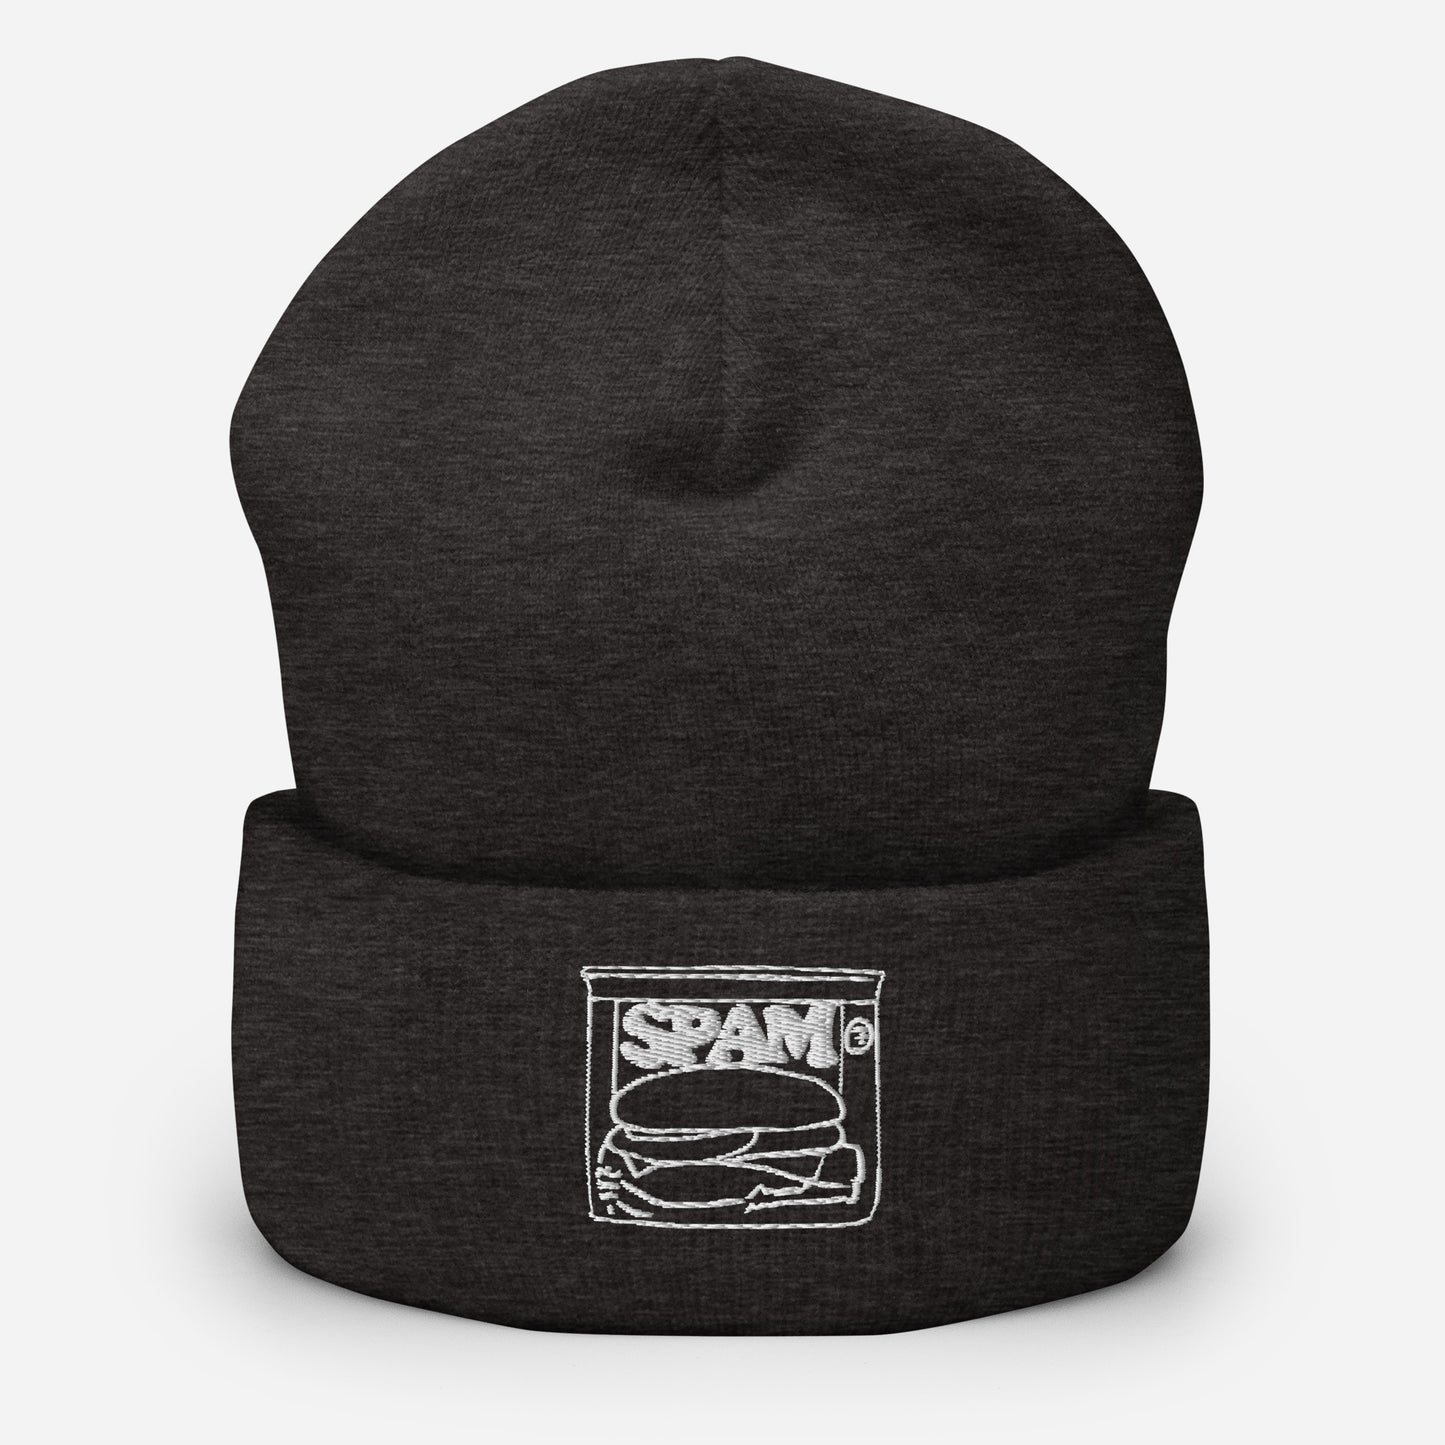 Embroidered Spam Illustration Cuffed Beanie